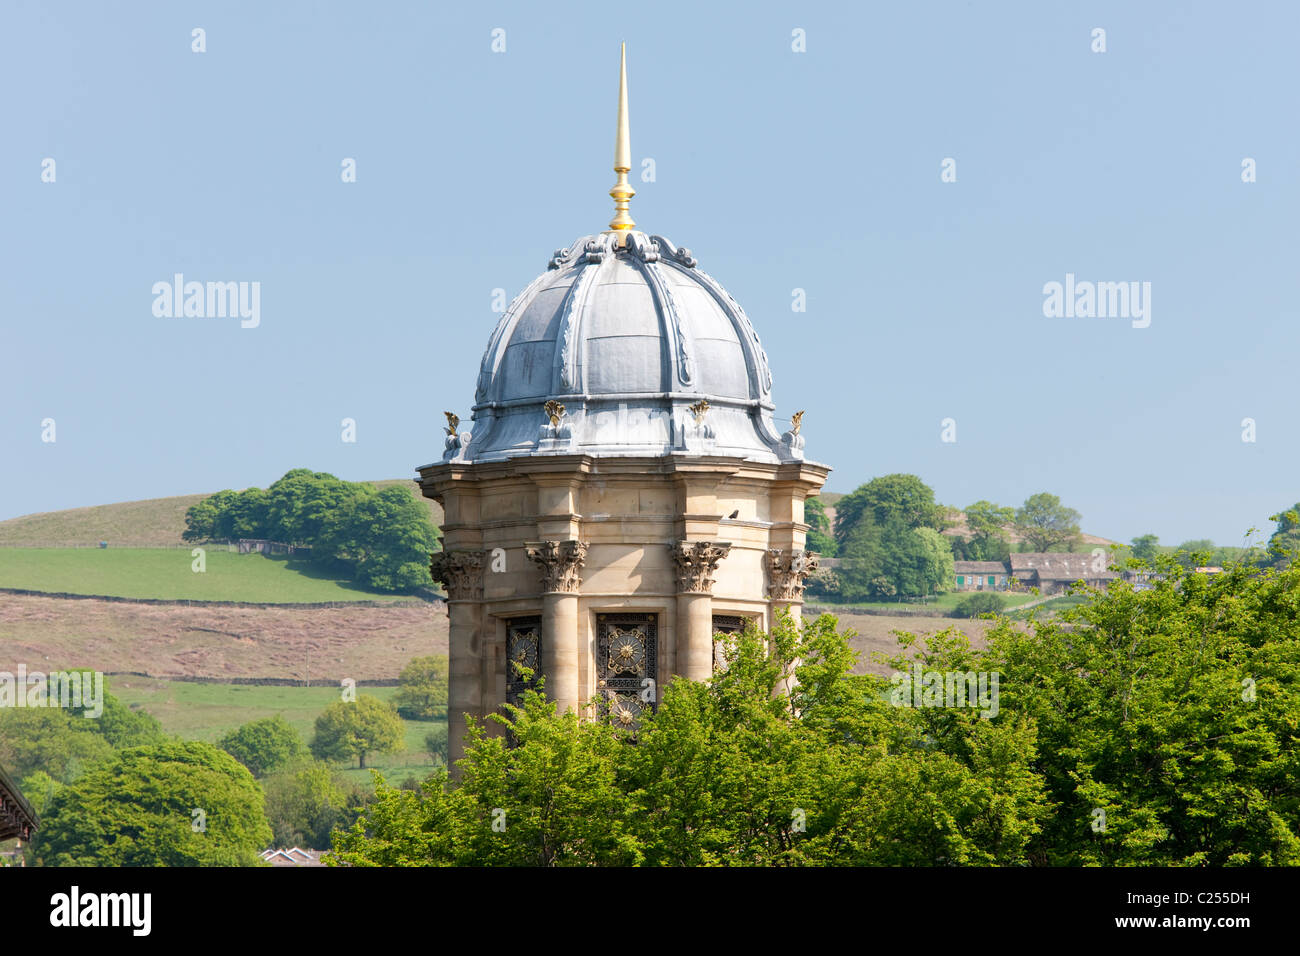 The dome of the United Reform Church in Saltaire, Yorkshire, UK Stock Photo